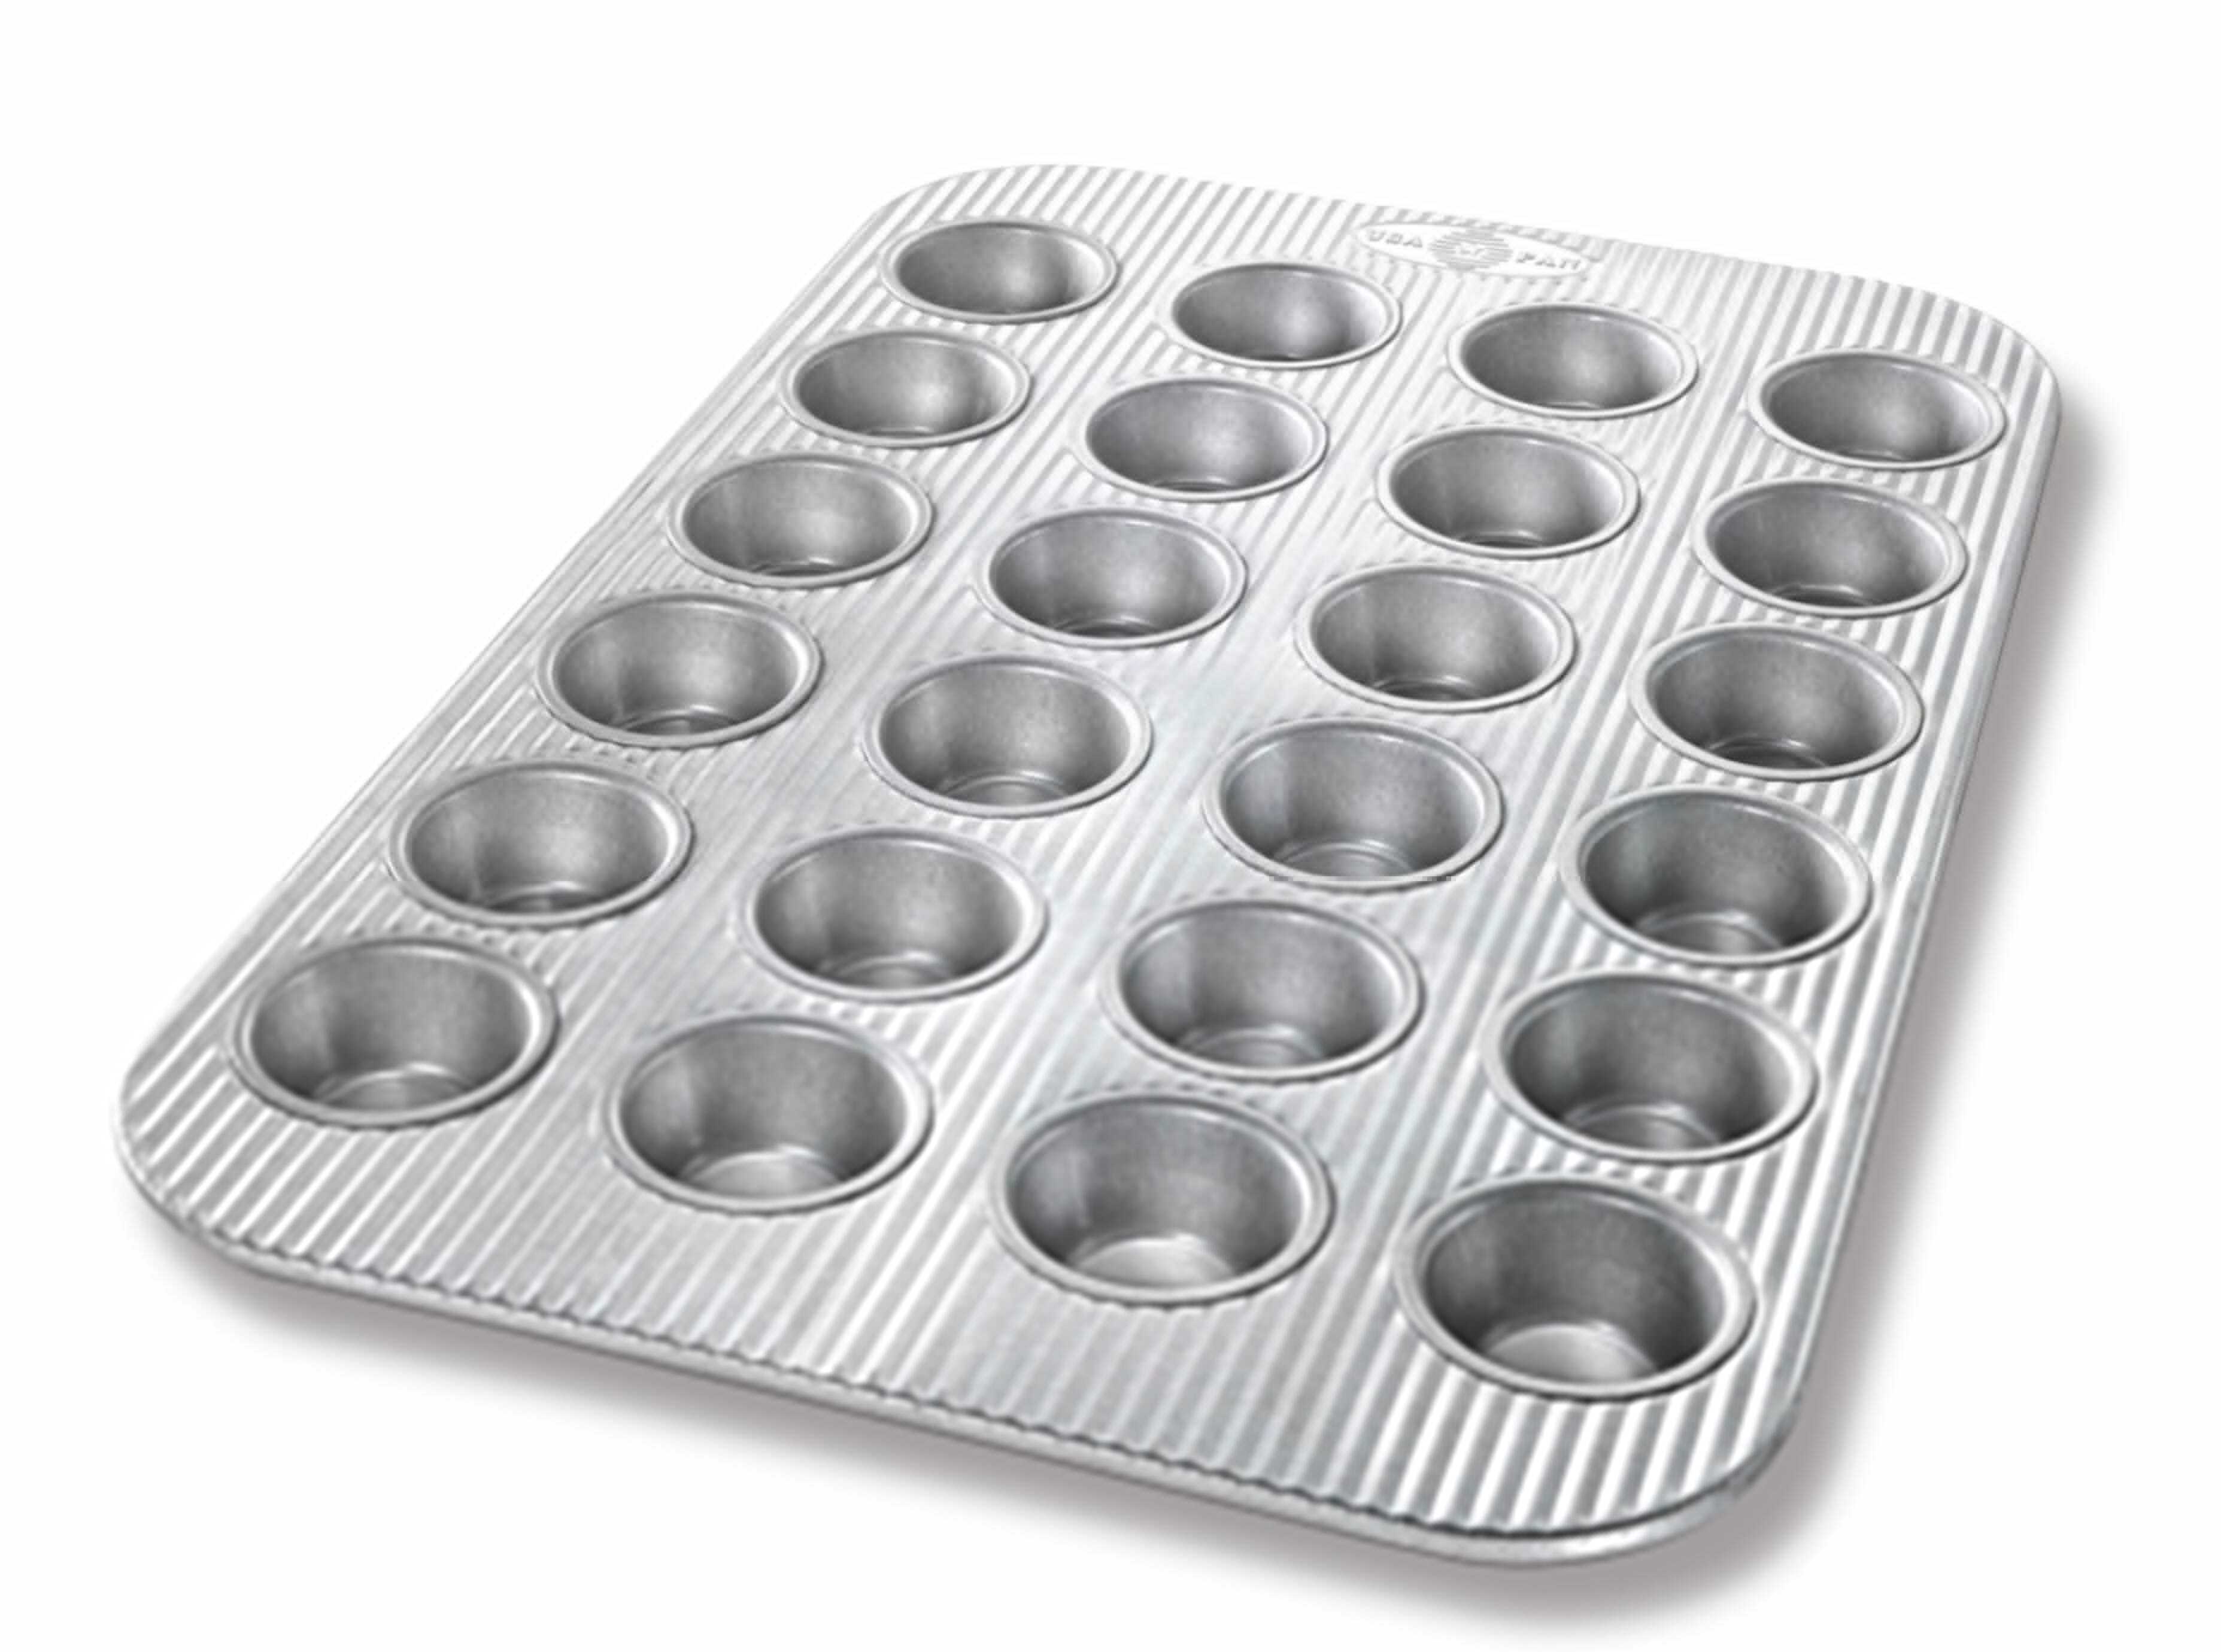  Commercial Bakeware Large Muffin Pan, 24-Cup: Home & Kitchen